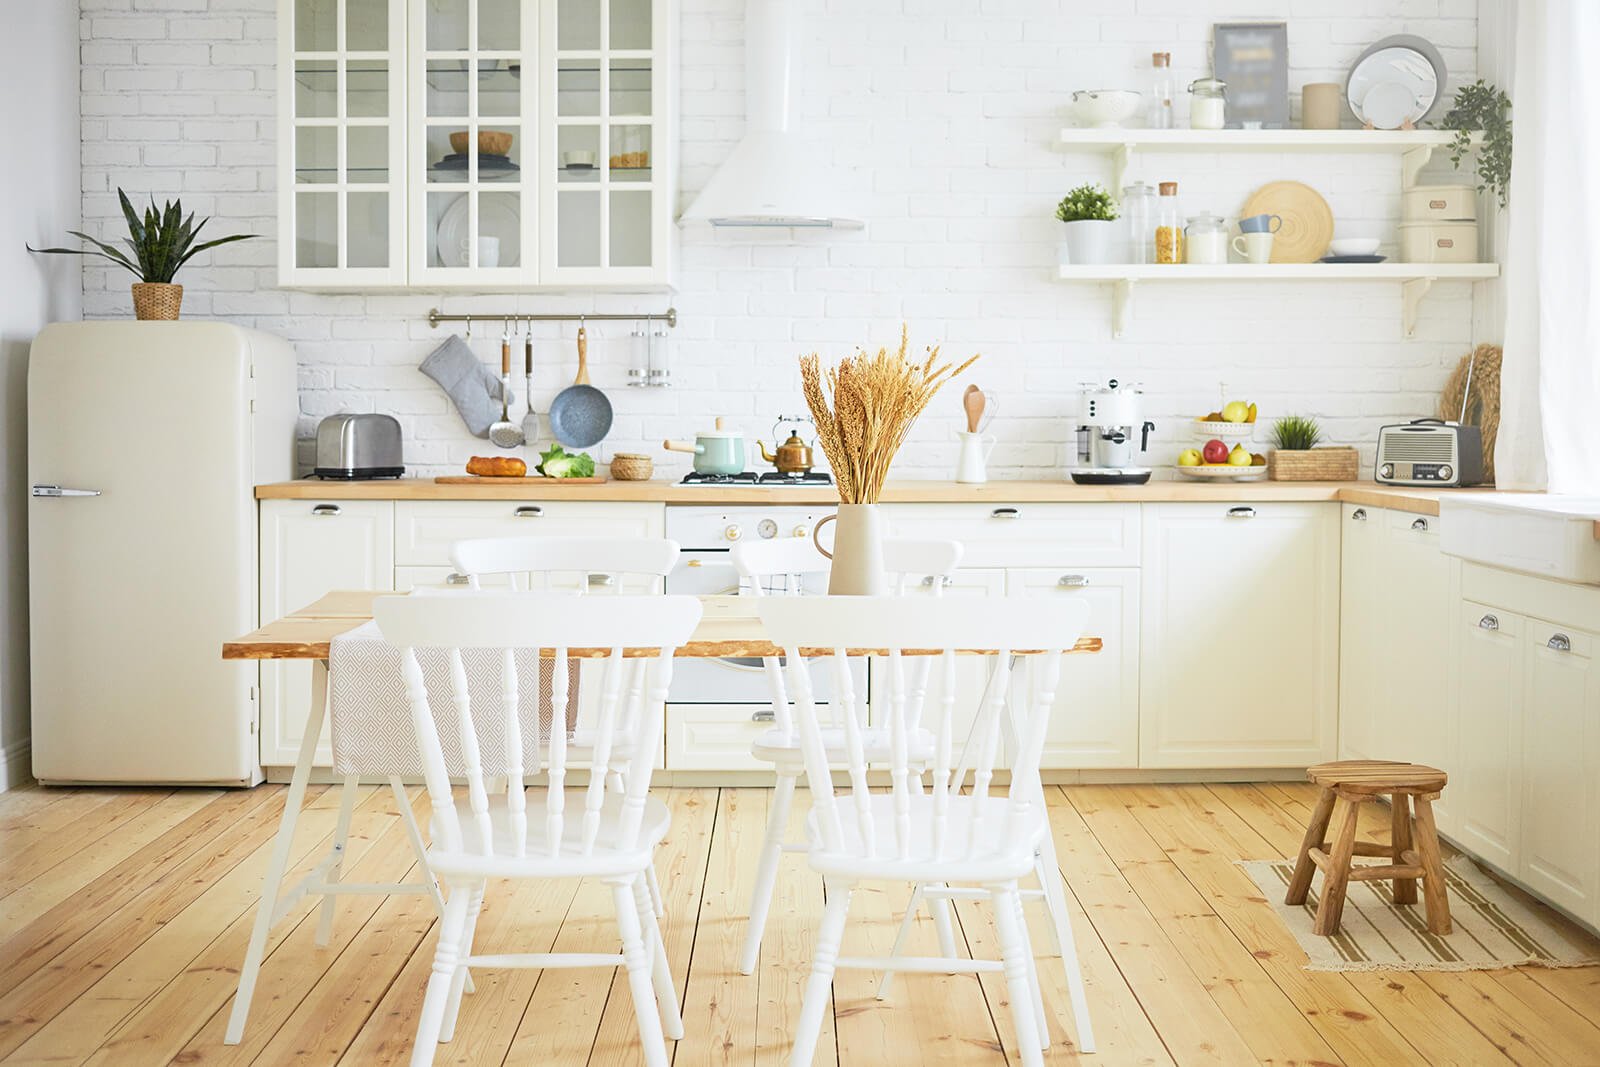 stylish-scandinavian-kitchen-interior-chairs-table-foreground-fridge-long-wooden-counter-with-machines-utensils-shelves-interiors-design-ideas-home-coziness-concept (2) (1)